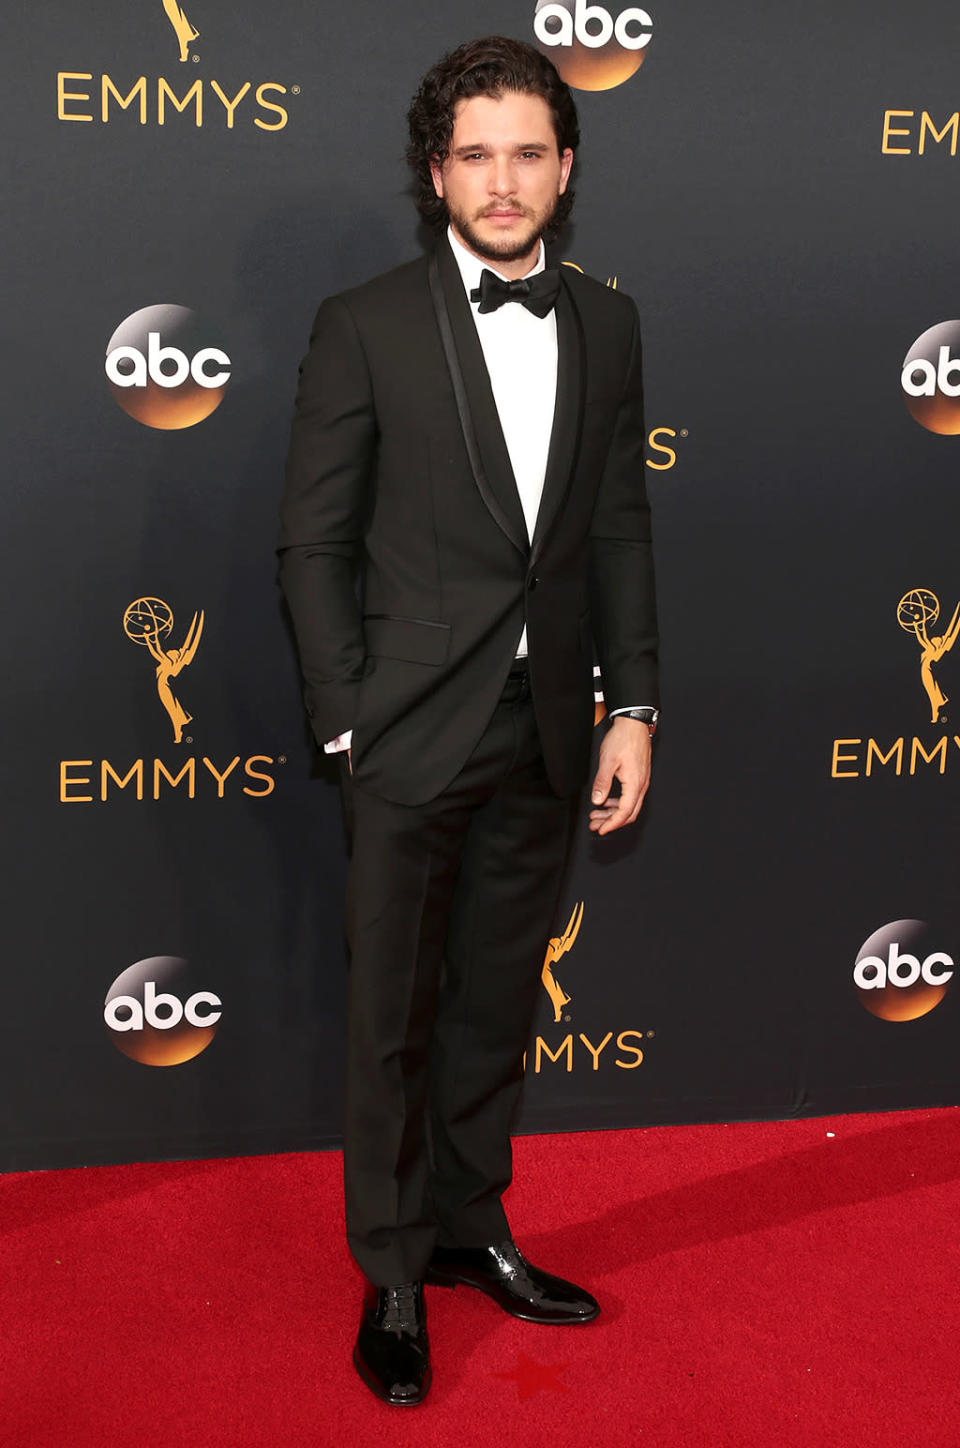 <p>Kit Harington arrives at the 68th Emmy Awards at the Microsoft Theater on September 18, 2016 in Los Angeles, Calif. (Photo by Getty Images)</p>